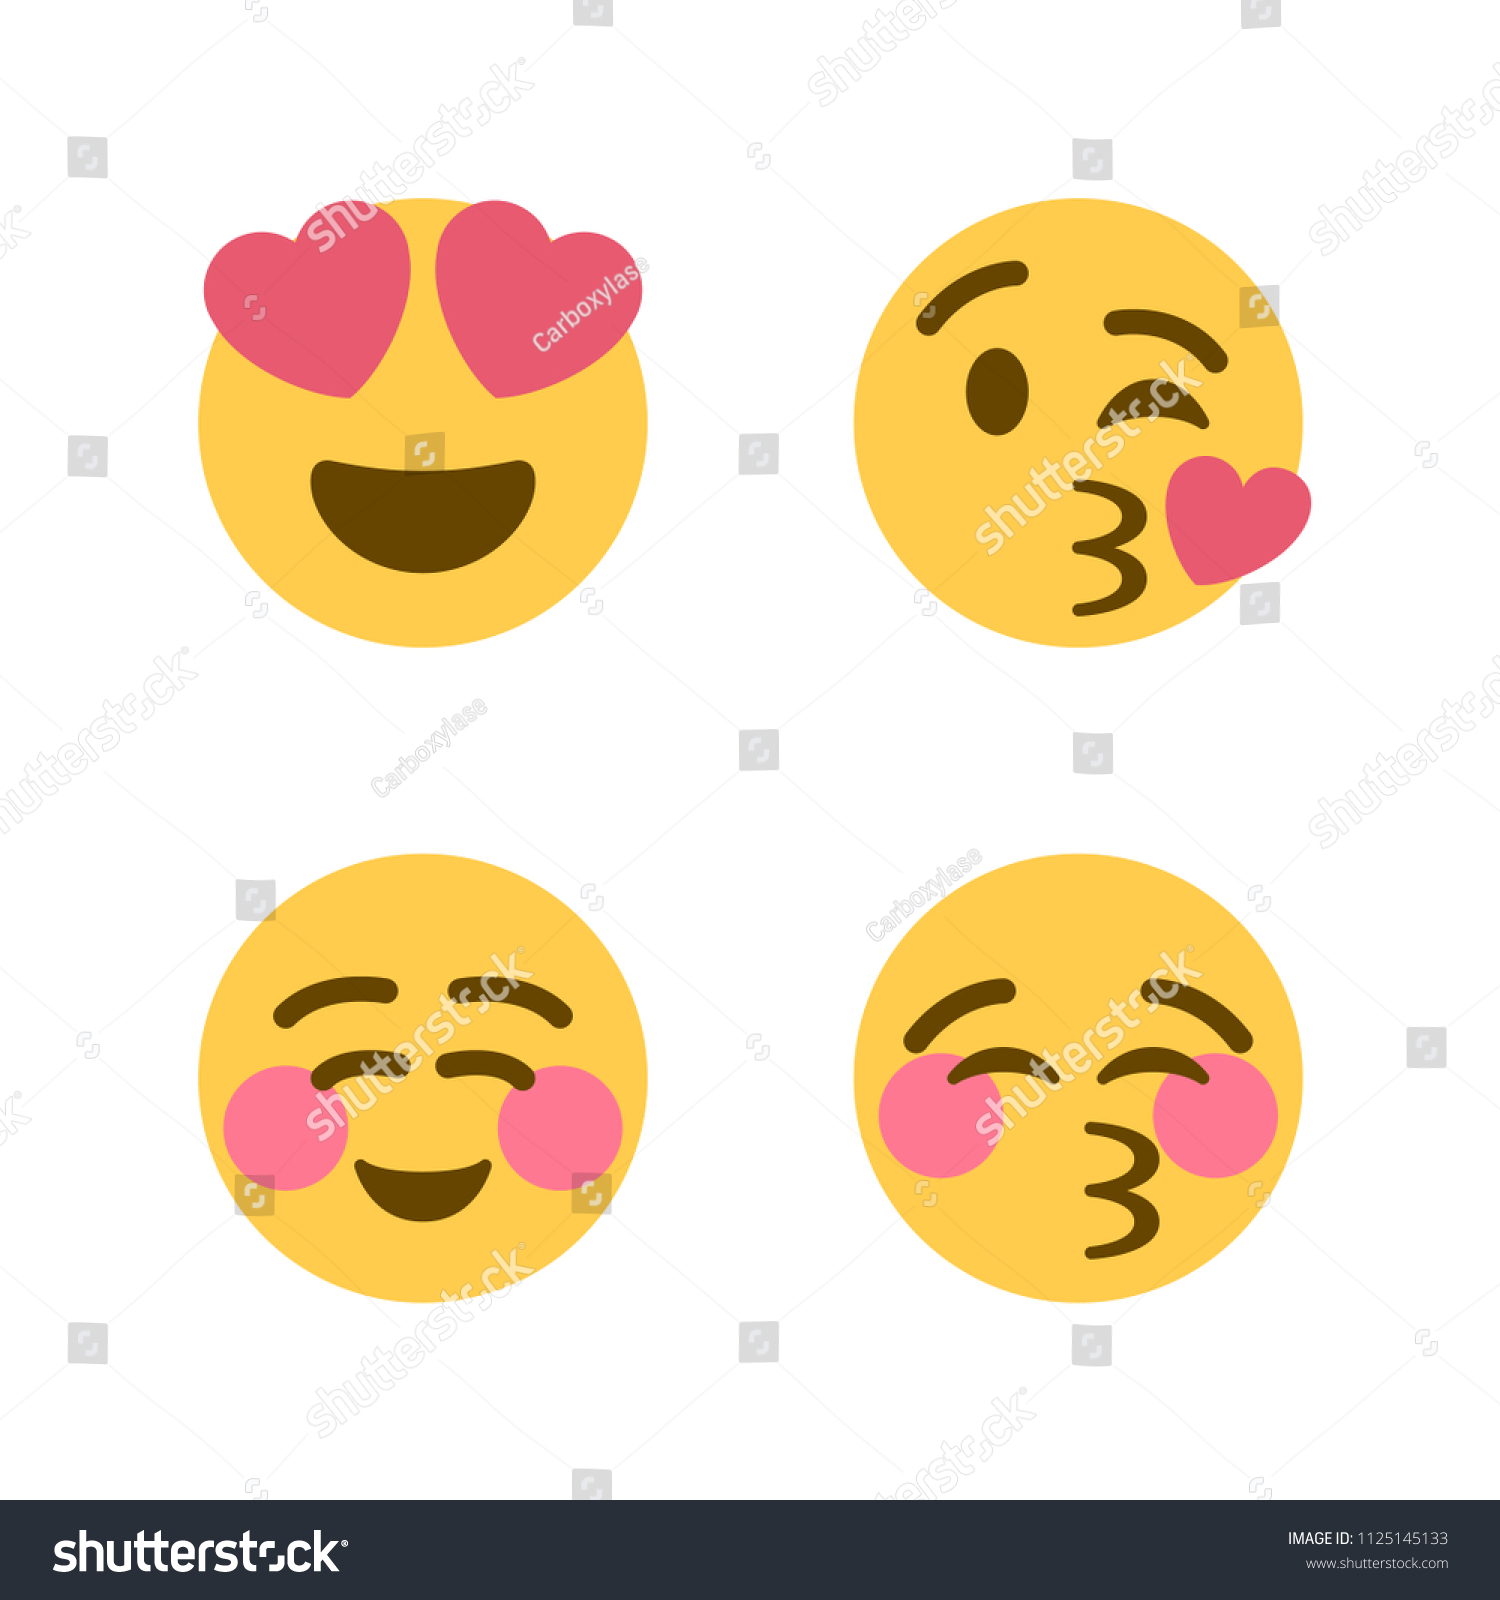 SVG of Smiling Face with Heart-Eyes, Blowing a Kiss, Smiling Face, Kissing Face with Closed Eyes. Vector illustration love, heart smiling emojis, emoticons icons, symbols, faces set, group. svg